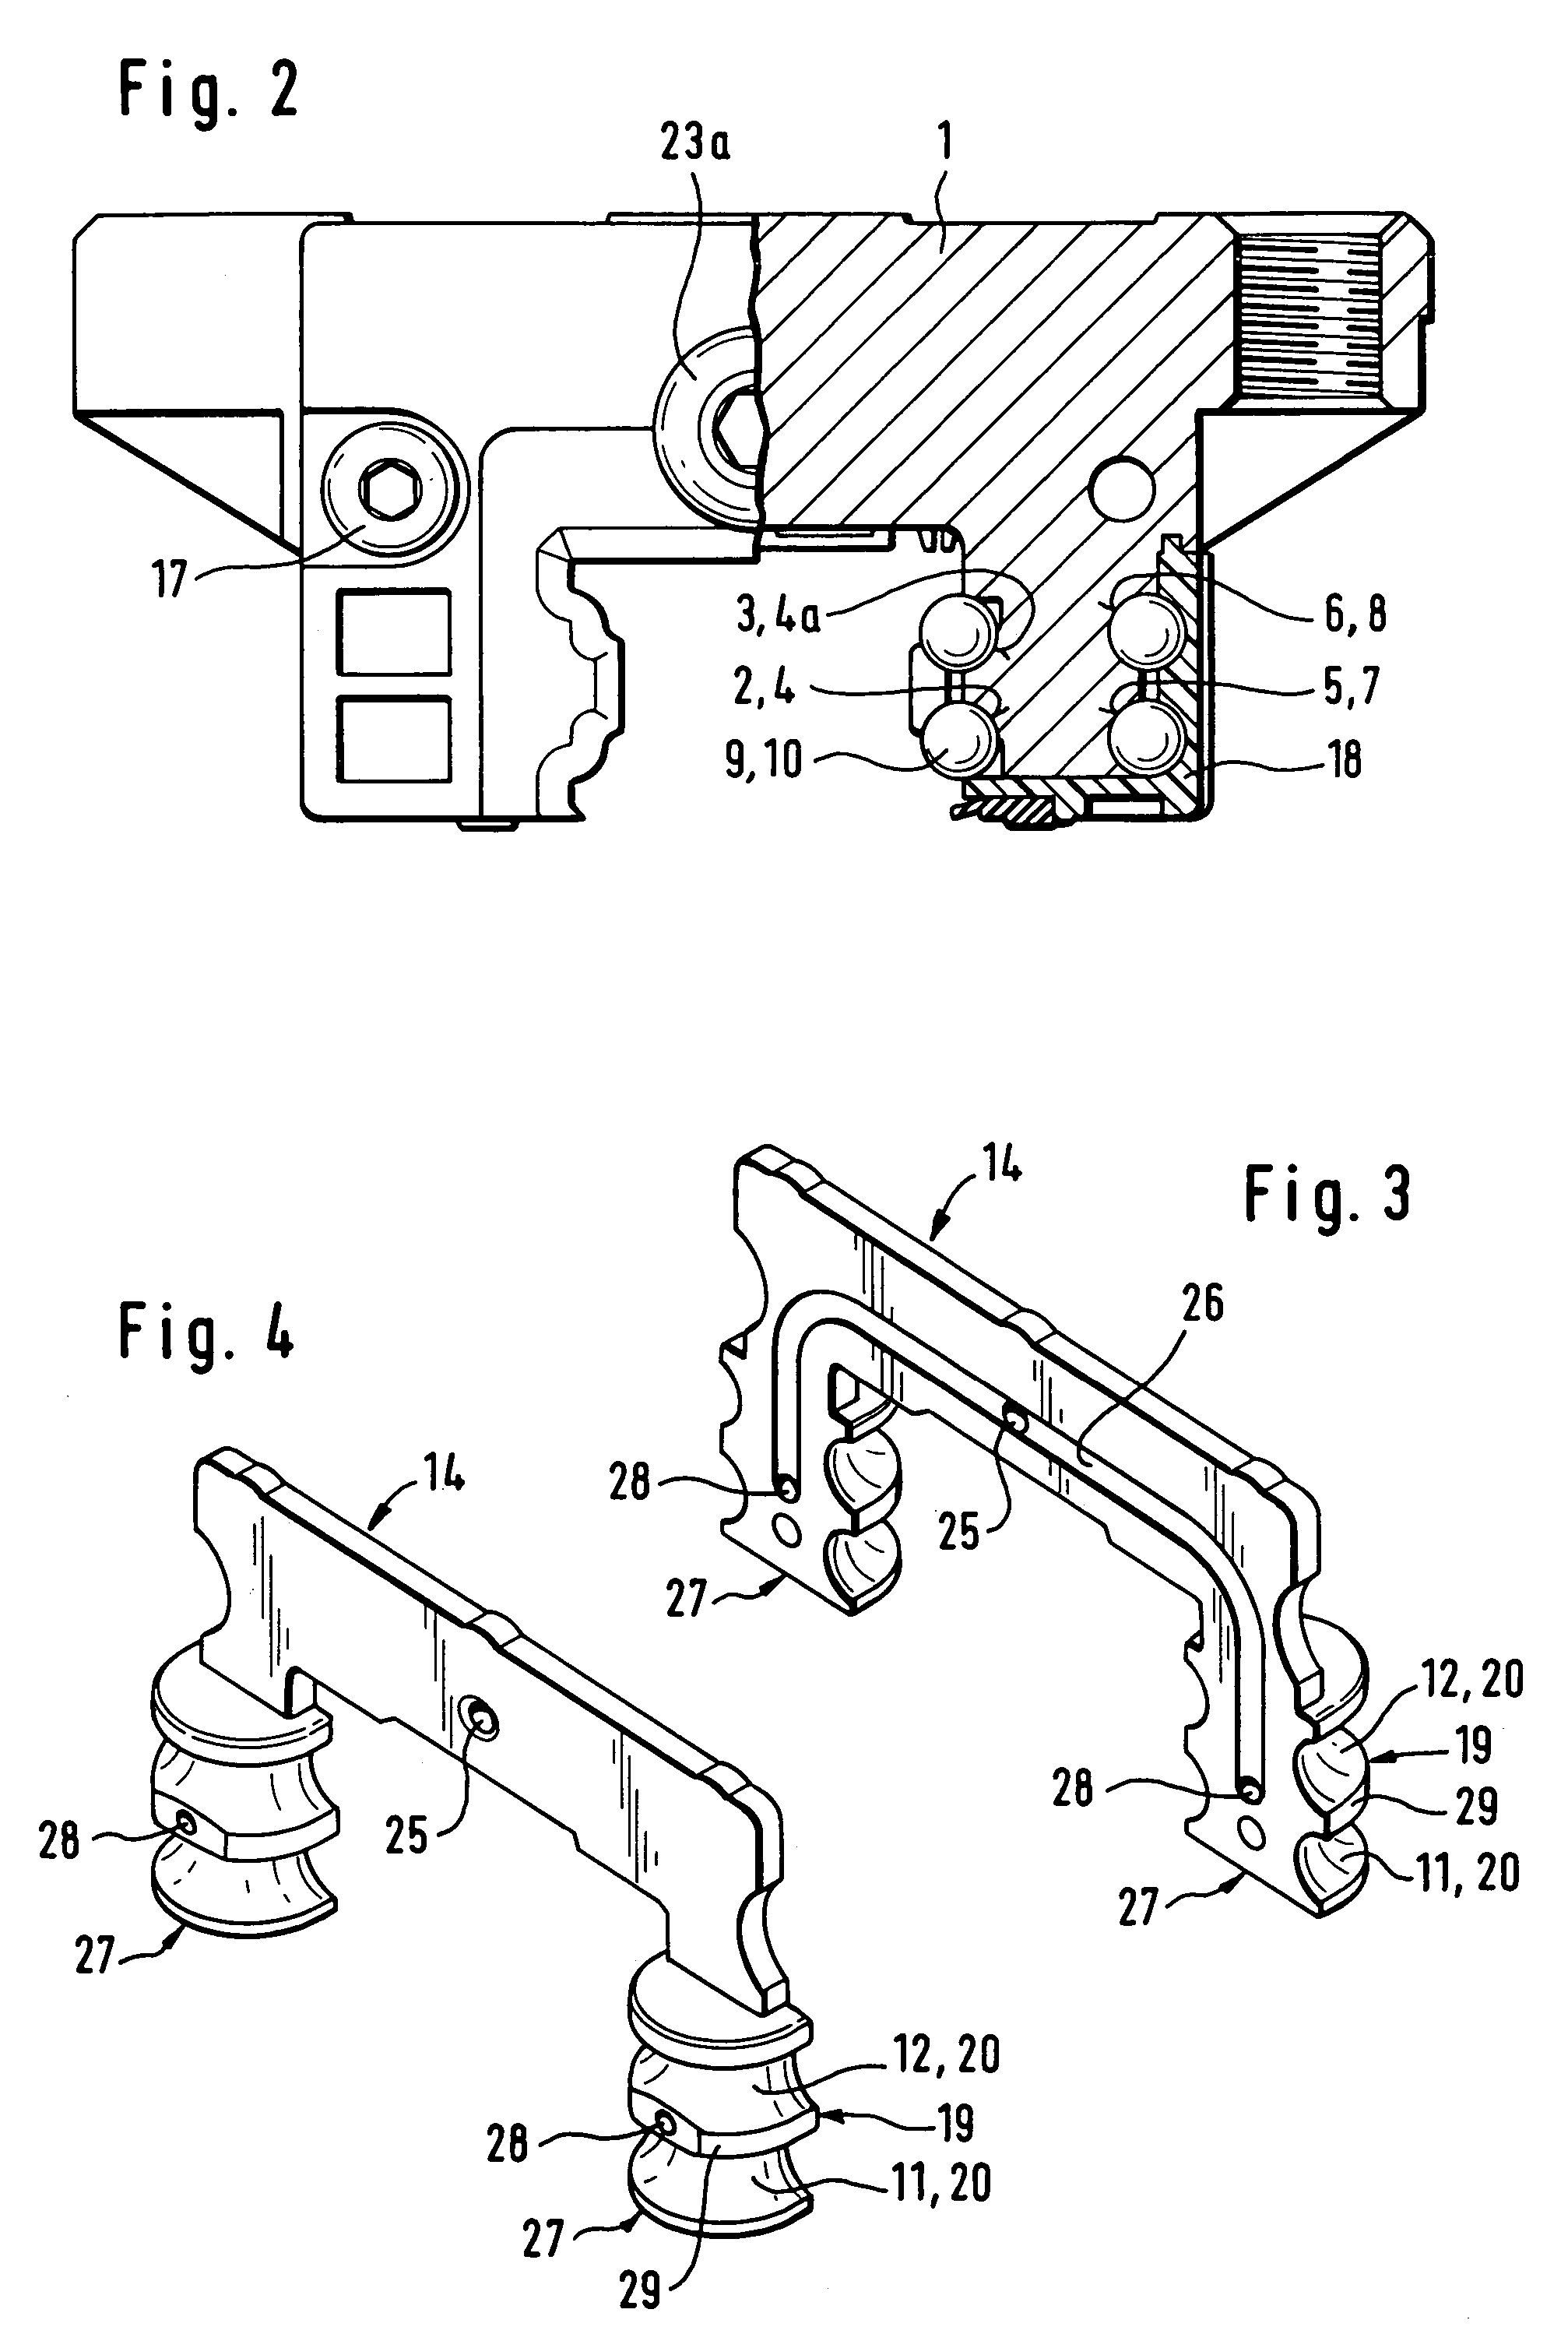 Guide carriage of a linear rolling bearing